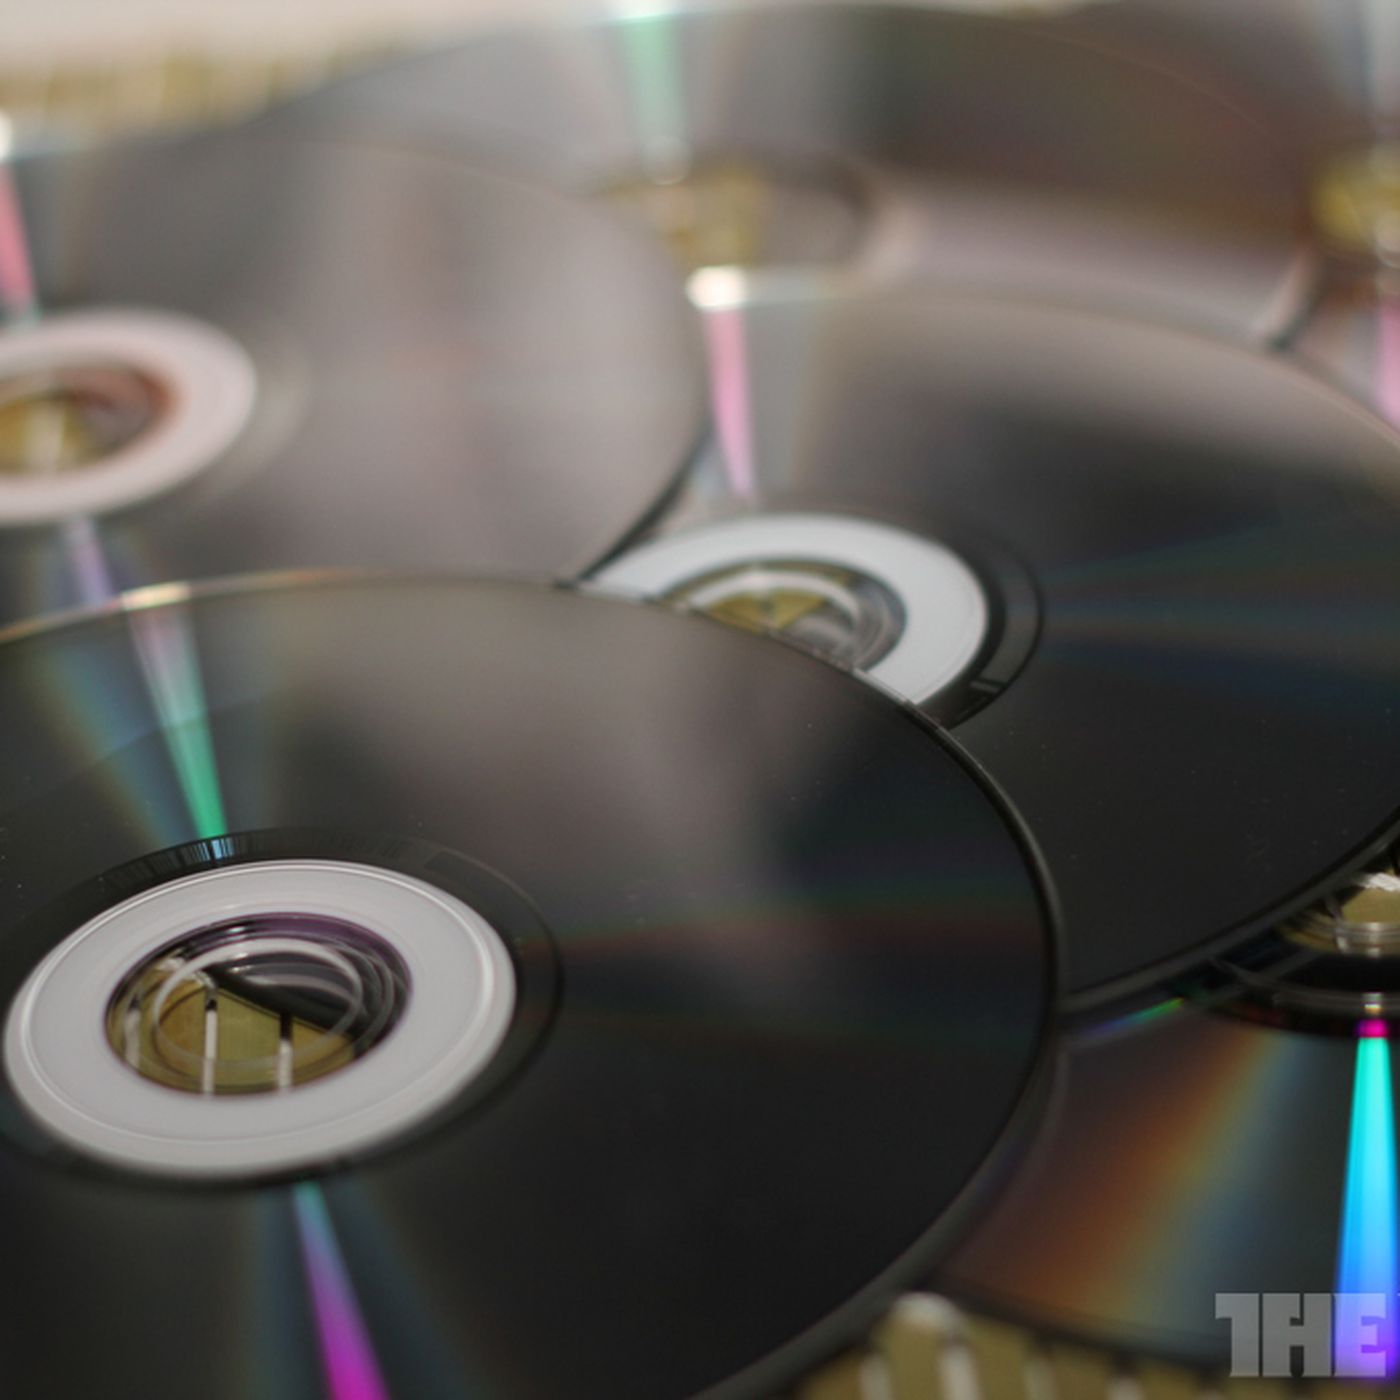 Best Buy will stop selling CDs as digital music revenue continues to ...